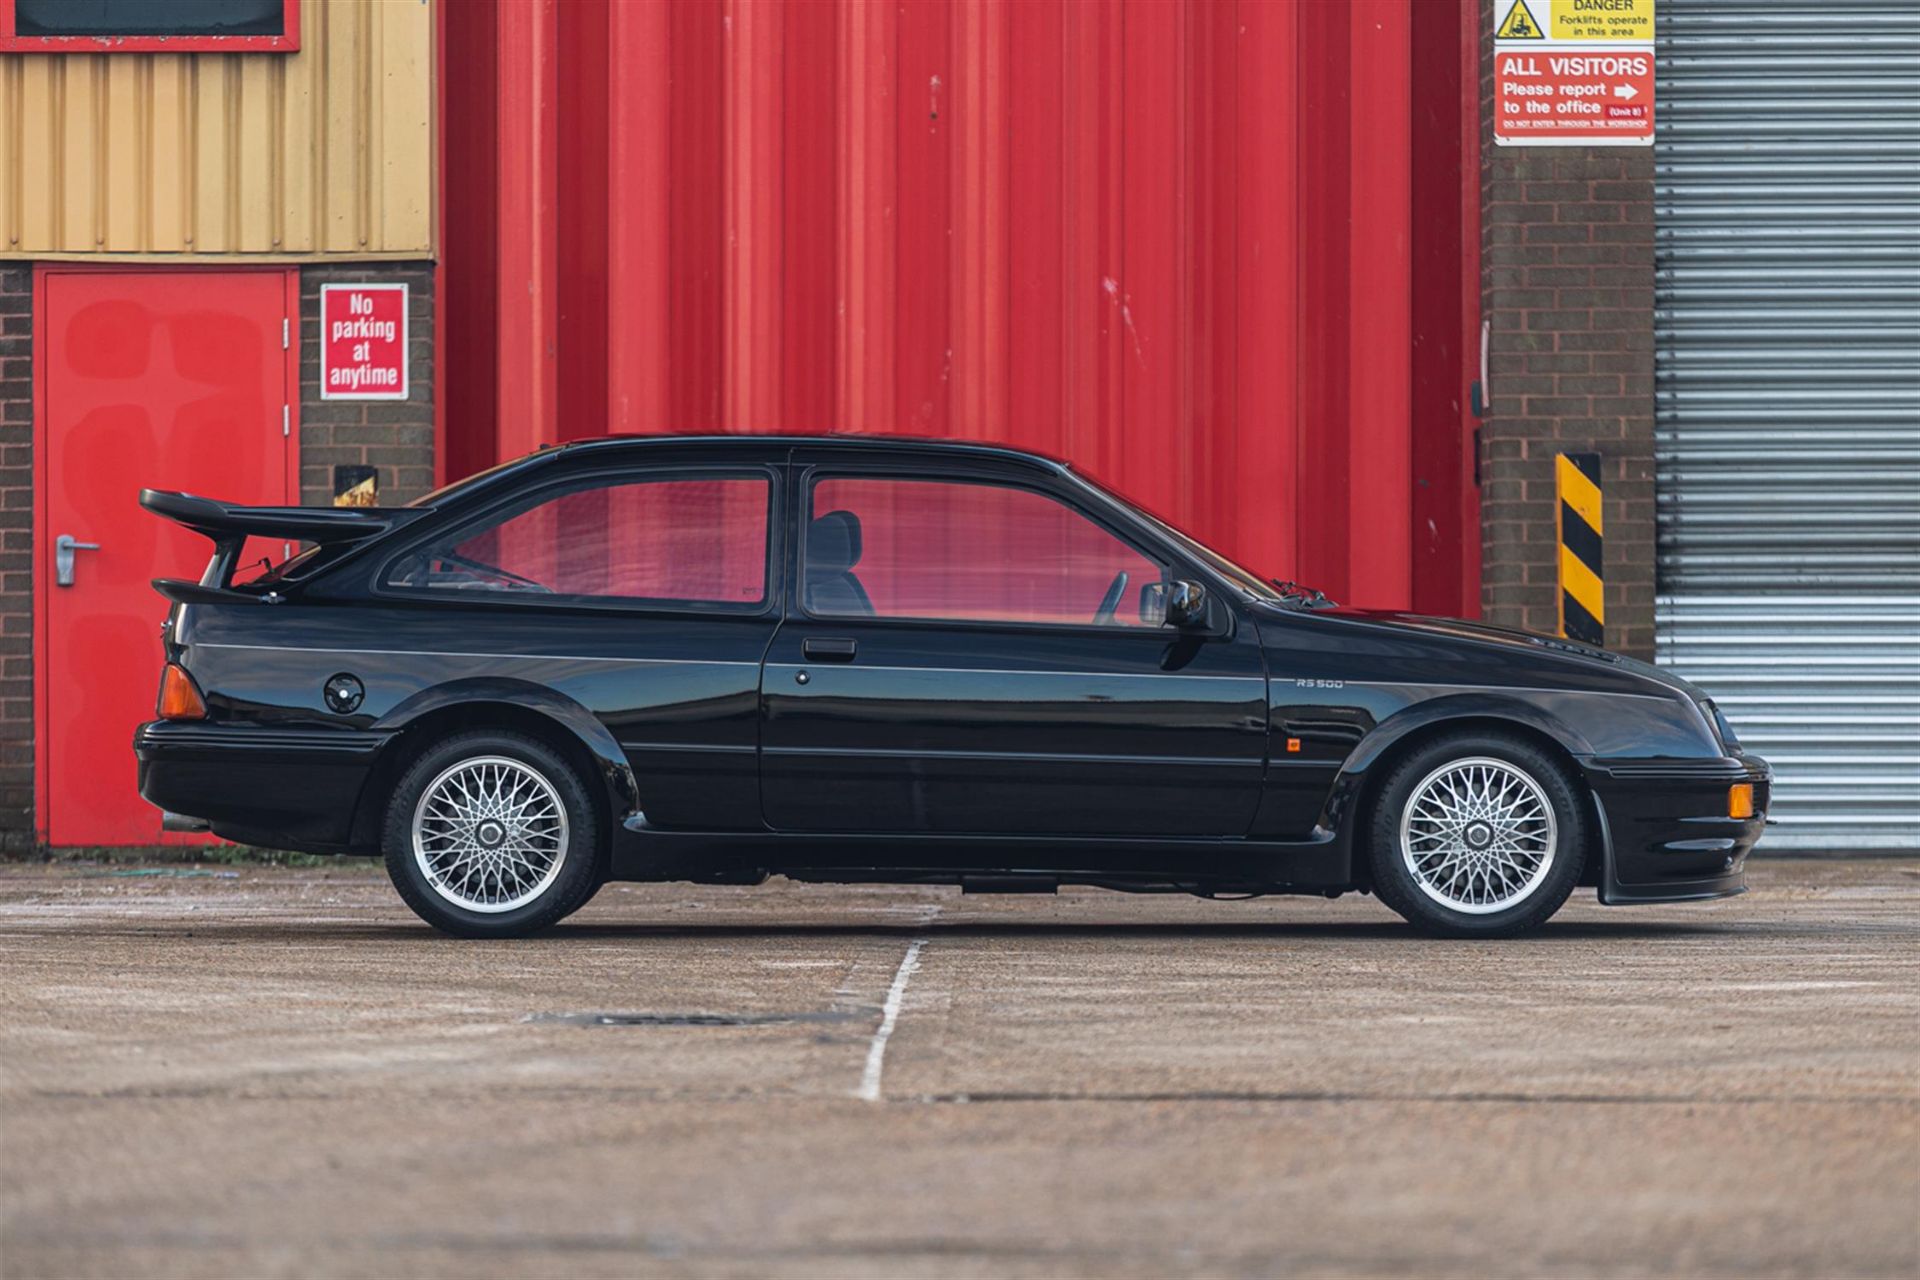 1987 Ford Sierra Cosworth RS500 - Image 5 of 10